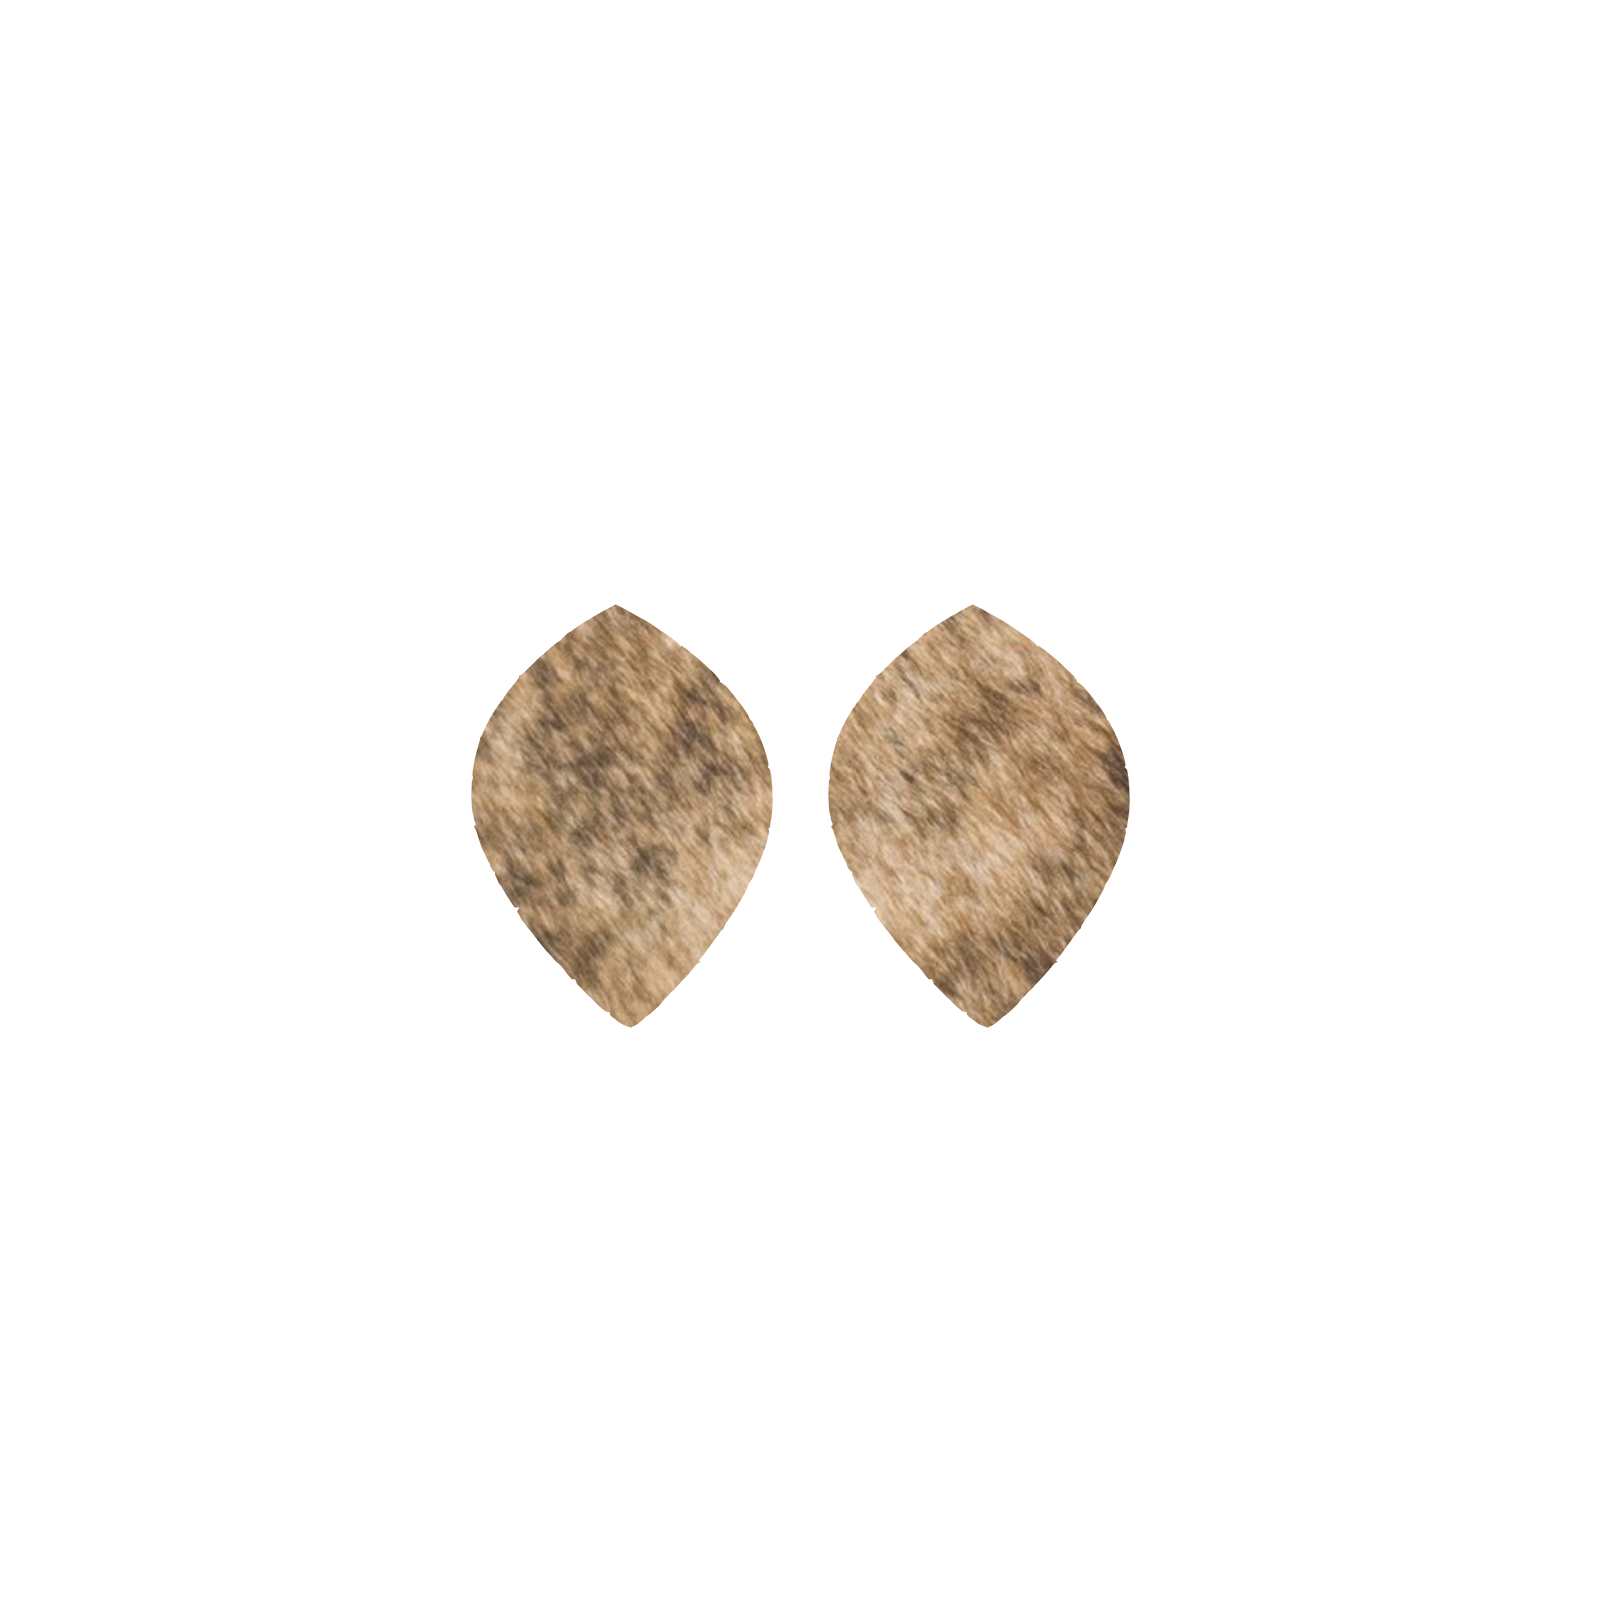 Light Brindle Light to Medium Brown, Black, and Off-White Hair On Die Cut Earrings, Small Leaf | The Leather Guy